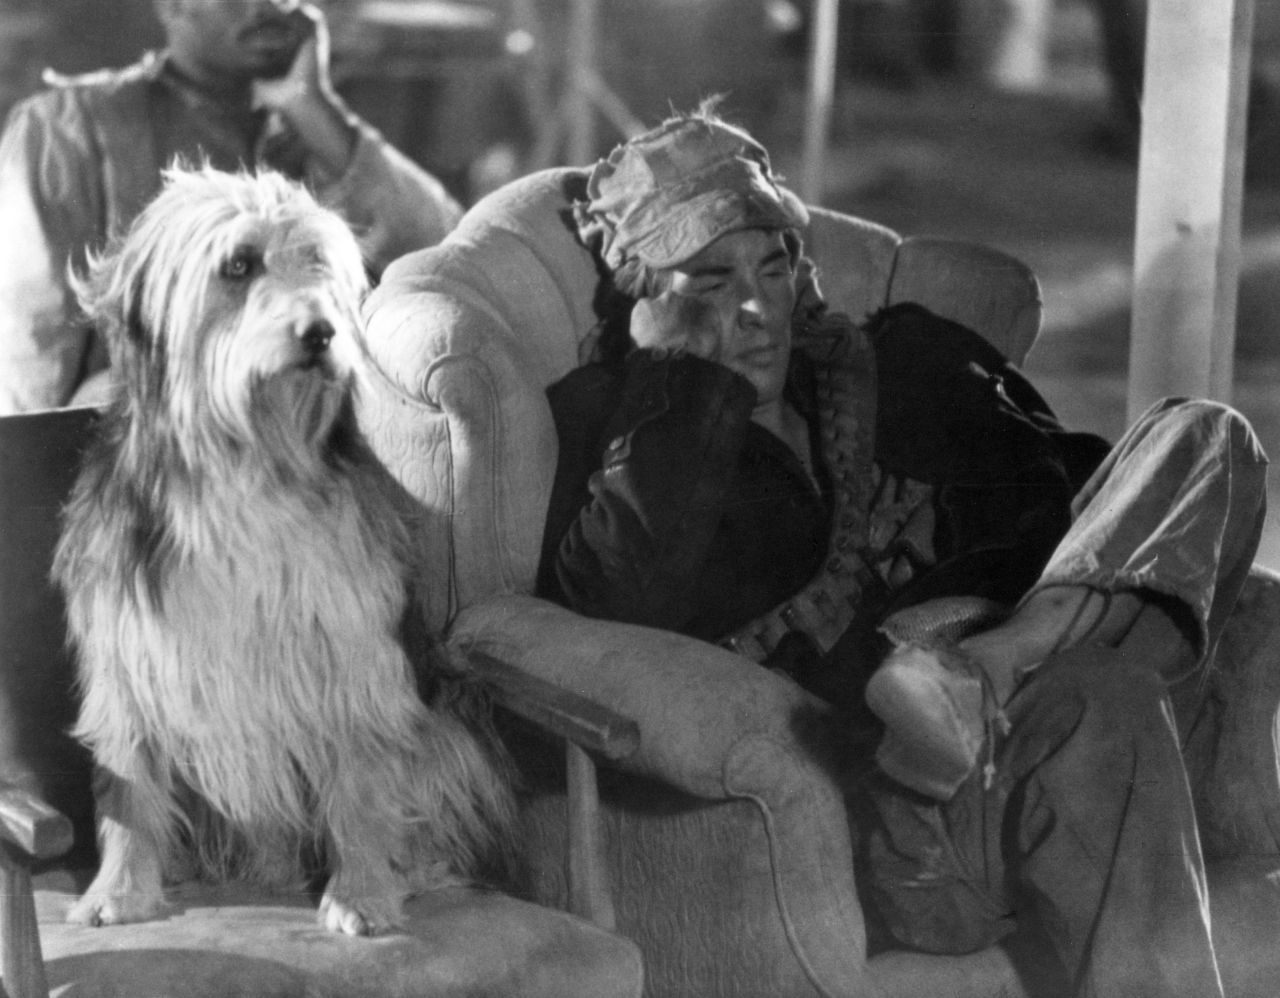 "A Boy and His Dog" (1975) takes place in a post-apocalyptic wasteland where Don Johnson and his dog wander in the year 2024. There are some survivors who live underground, but their society isn't necessarily better off.